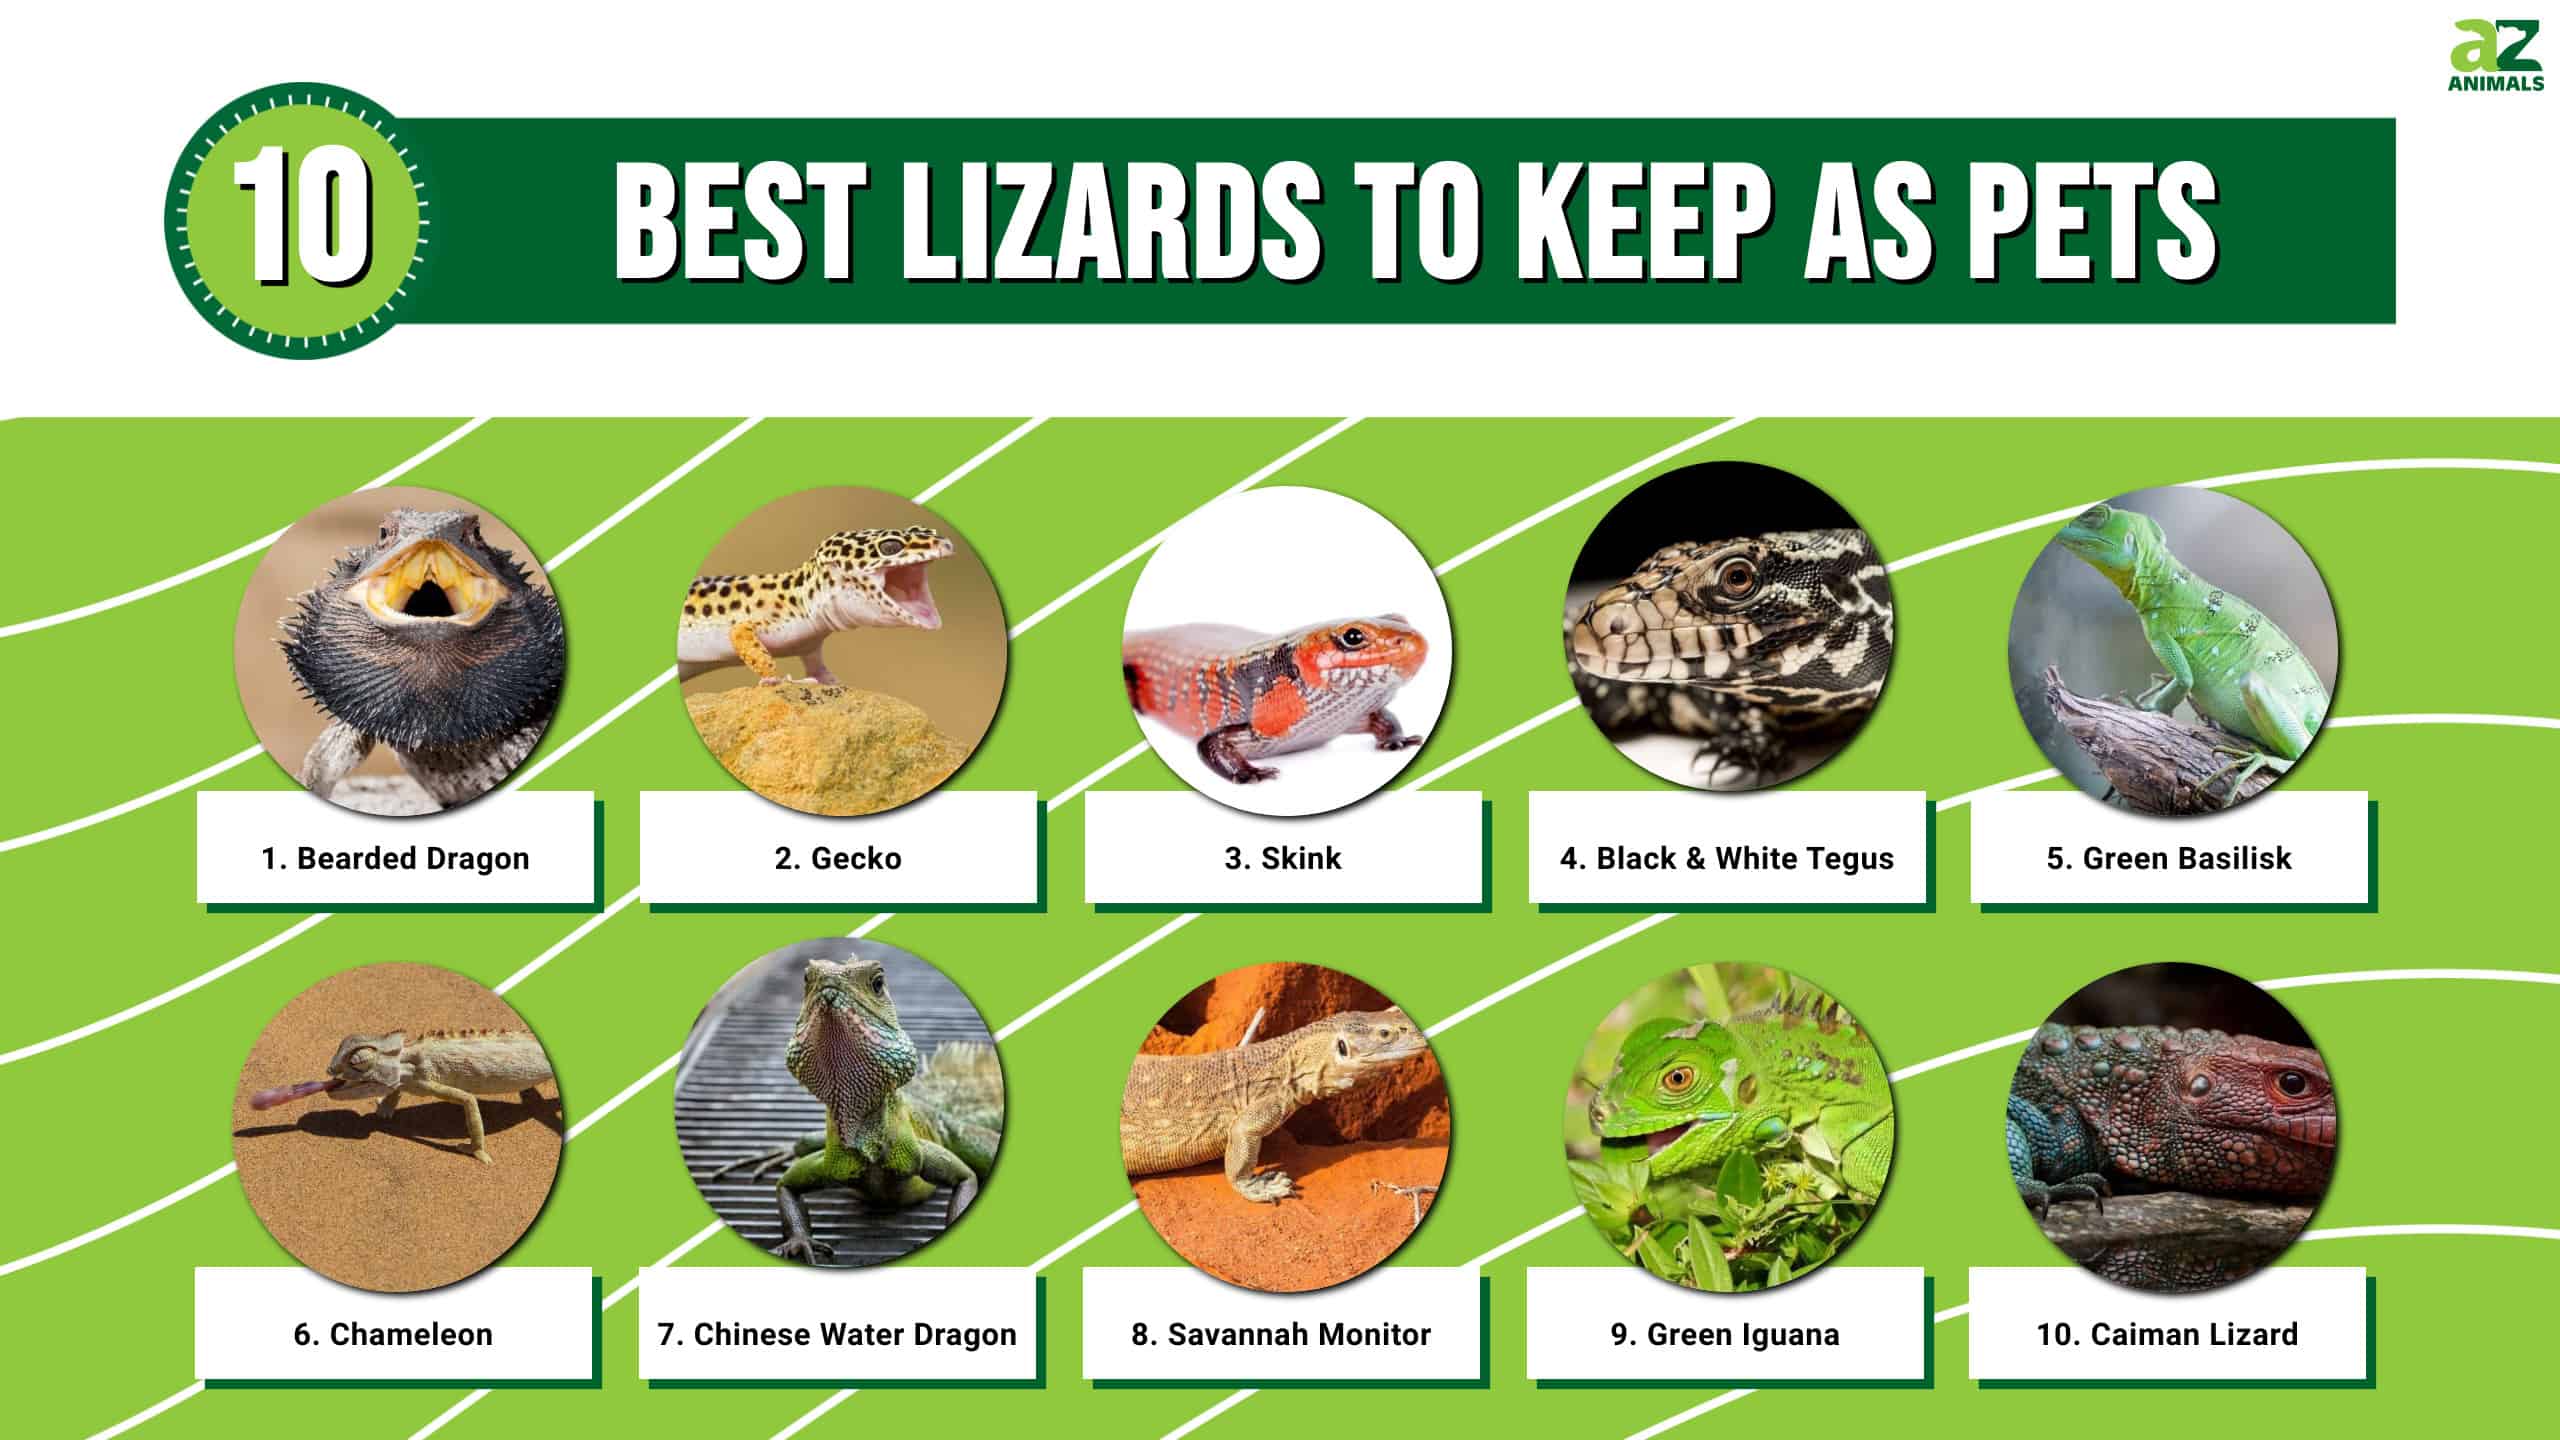 How to Catch a Lizard in 4 Simple Steps - A-Z Animals